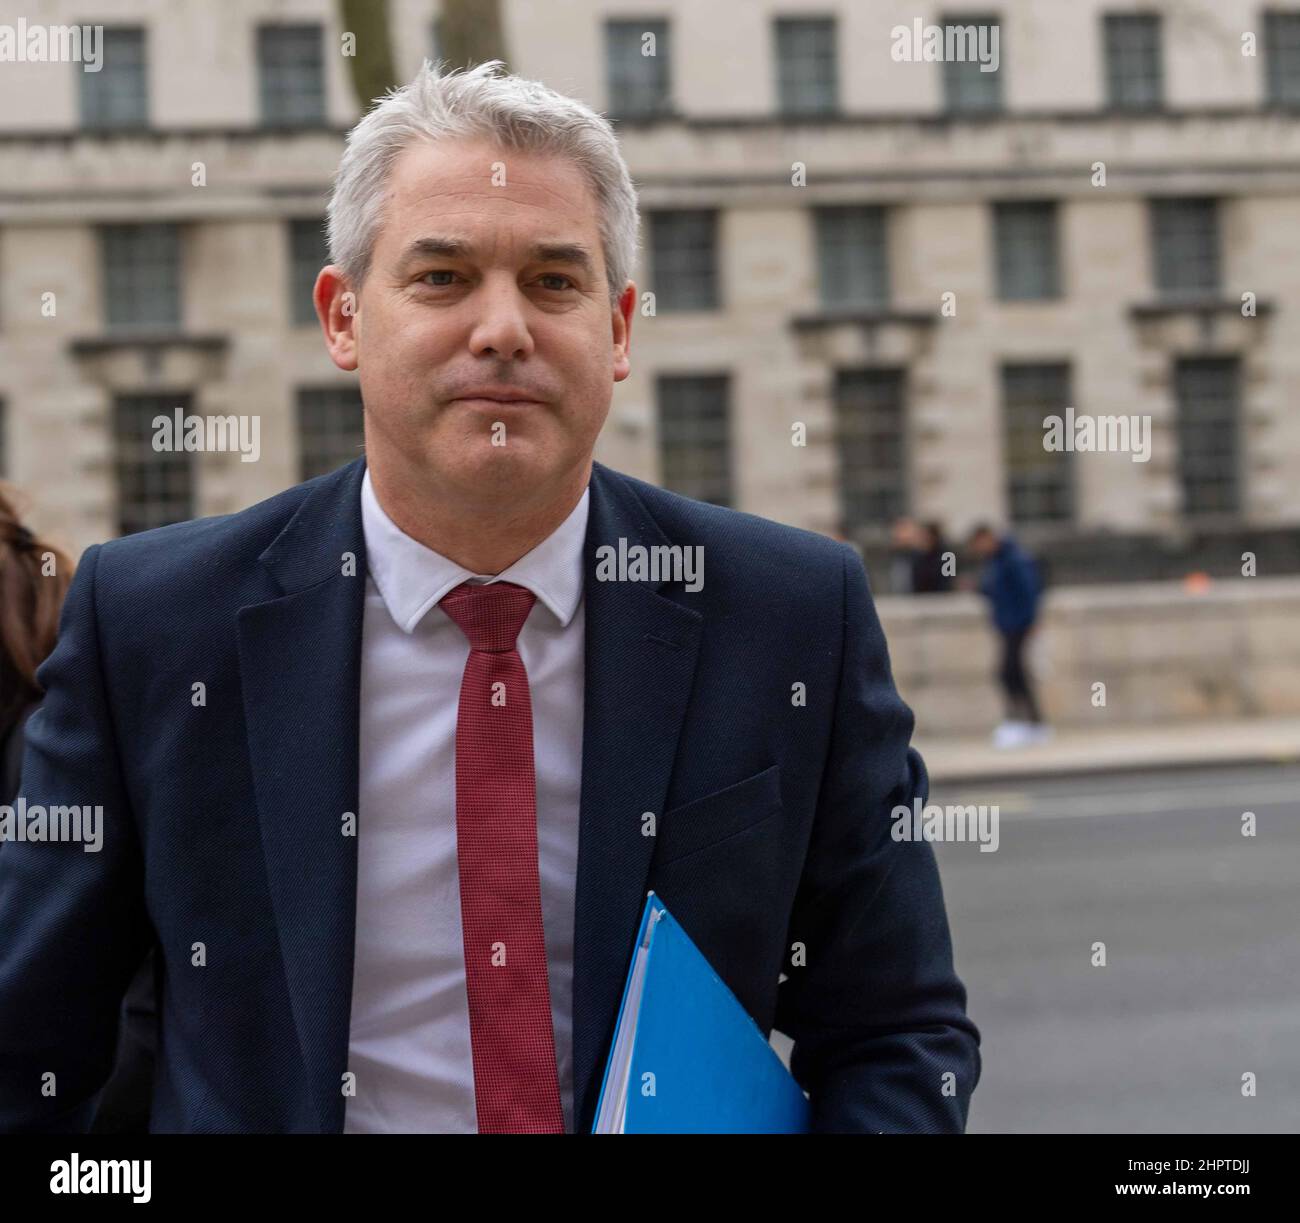 London, UK. 23rd Feb, 2022. Stephen Barclay, Chief of staff to the Prime Minister, arrives at the cabinet office London UK Credit: Ian Davidson/Alamy Live News Stock Photo